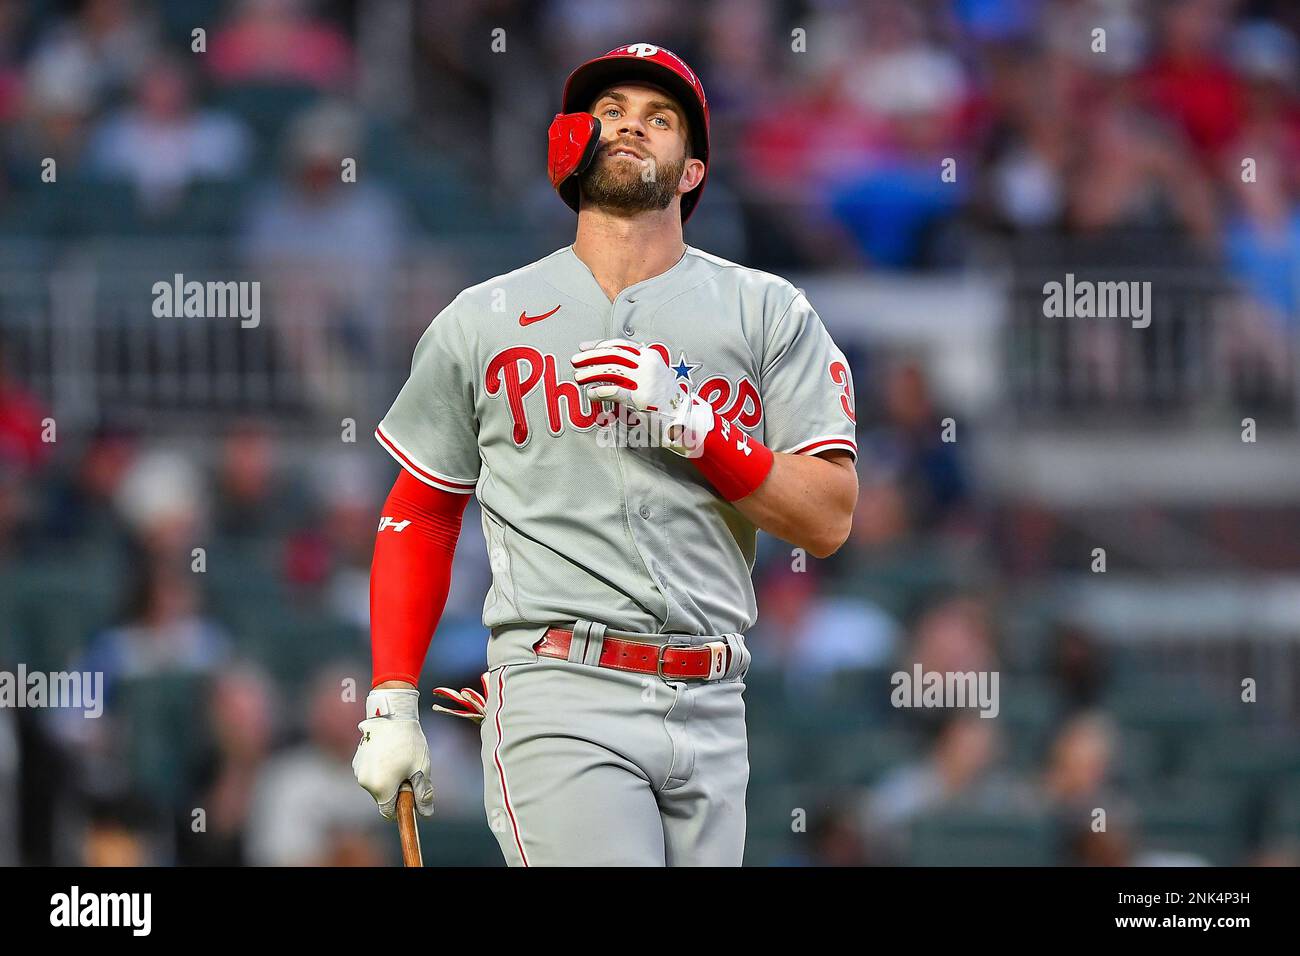 ATLANTA, GA – MAY 24: Philadelphia designated hitter Bryce Harper (3)  reacts after lining out during the MLB game between the Philadelphia  Phillies and the Atlanta Braves on May 24th, 2022 at